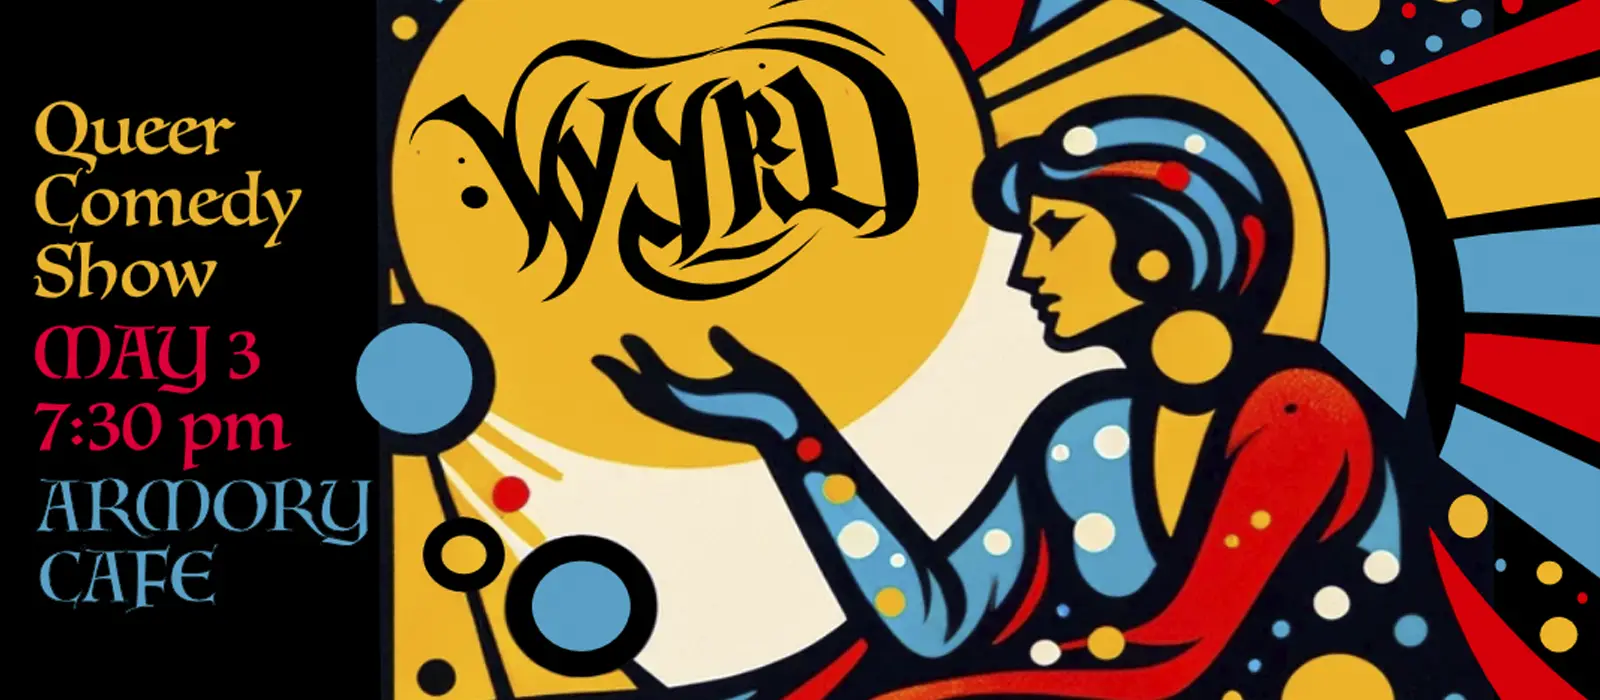 WYRD: Queer Comedy Inspired by the Occult